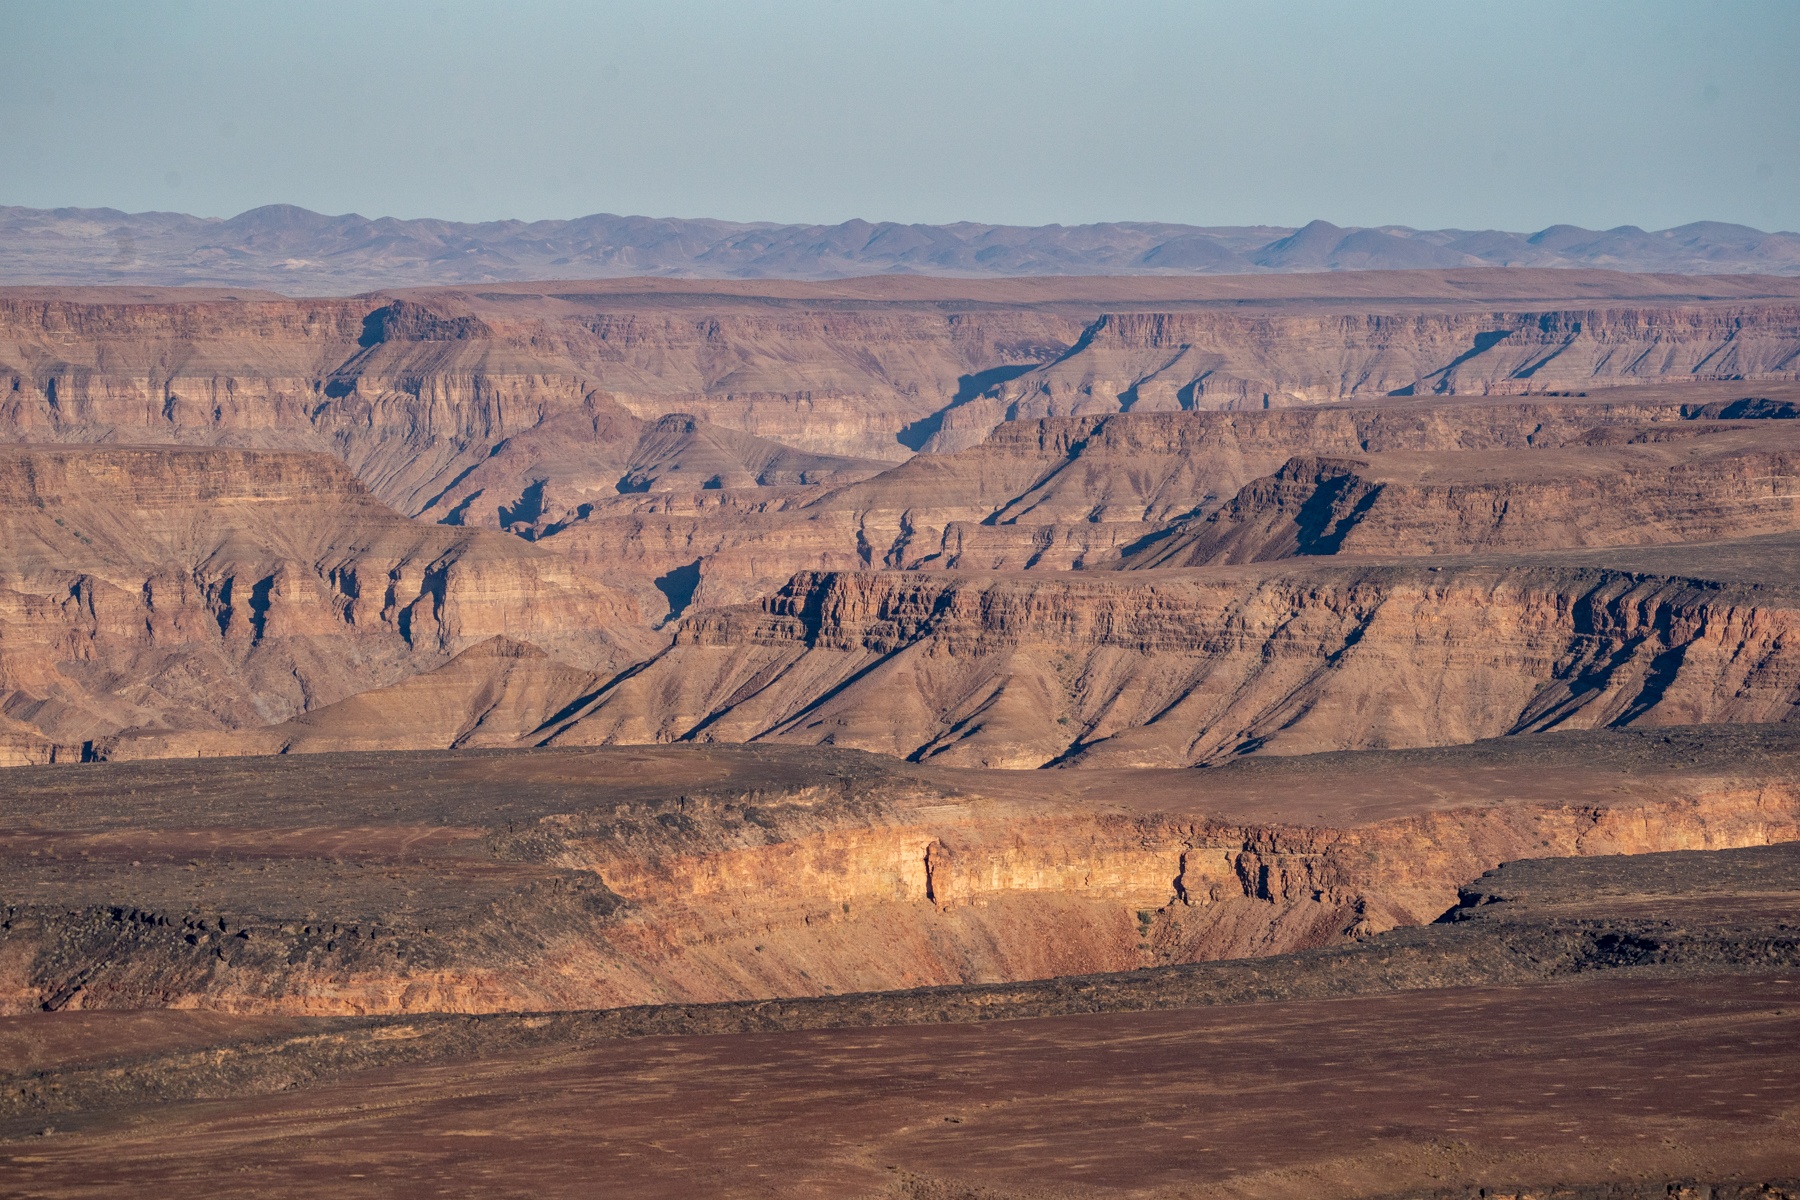 The multilayered cliffs surrounding Fish River Canyon, the second largest canyon on earth after the Grand Canyon